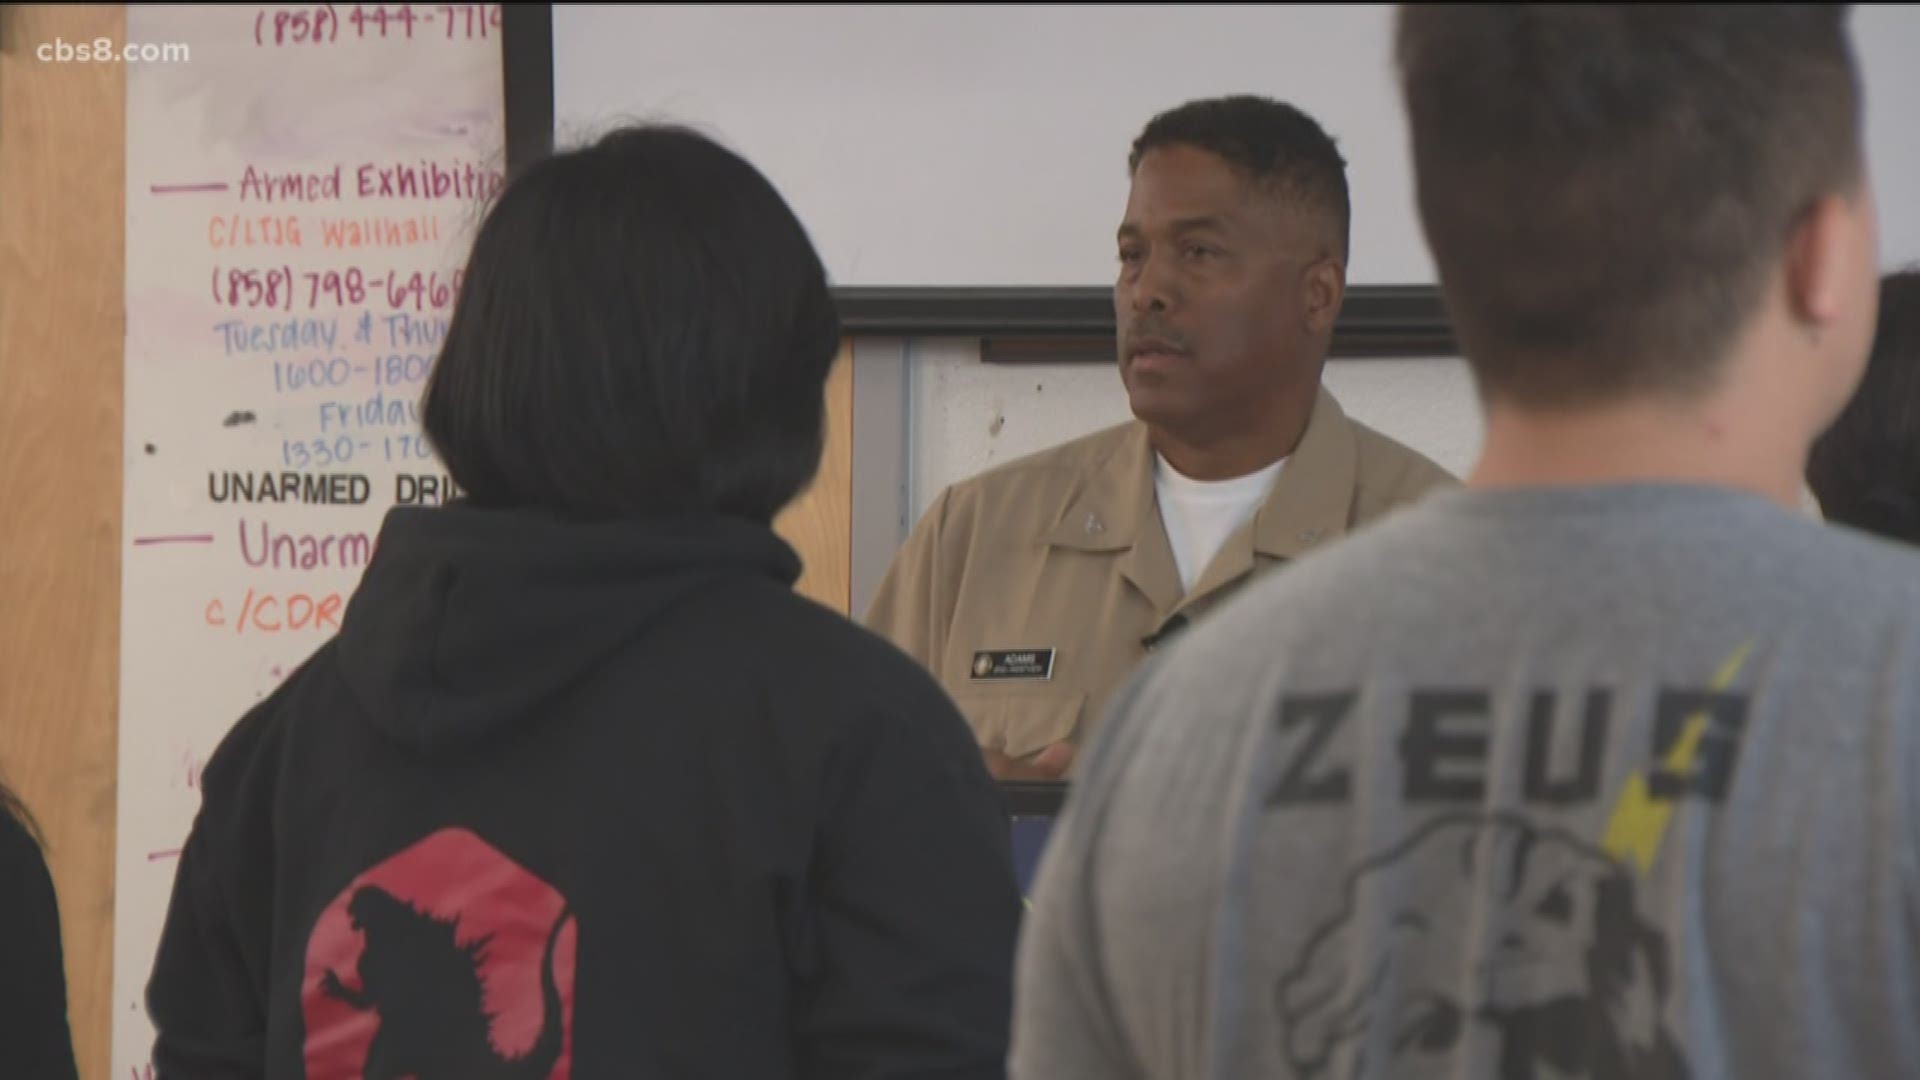 18 years after the attacks, An ROTC instructor is giving his students a first-hand history lesson in San Diego.